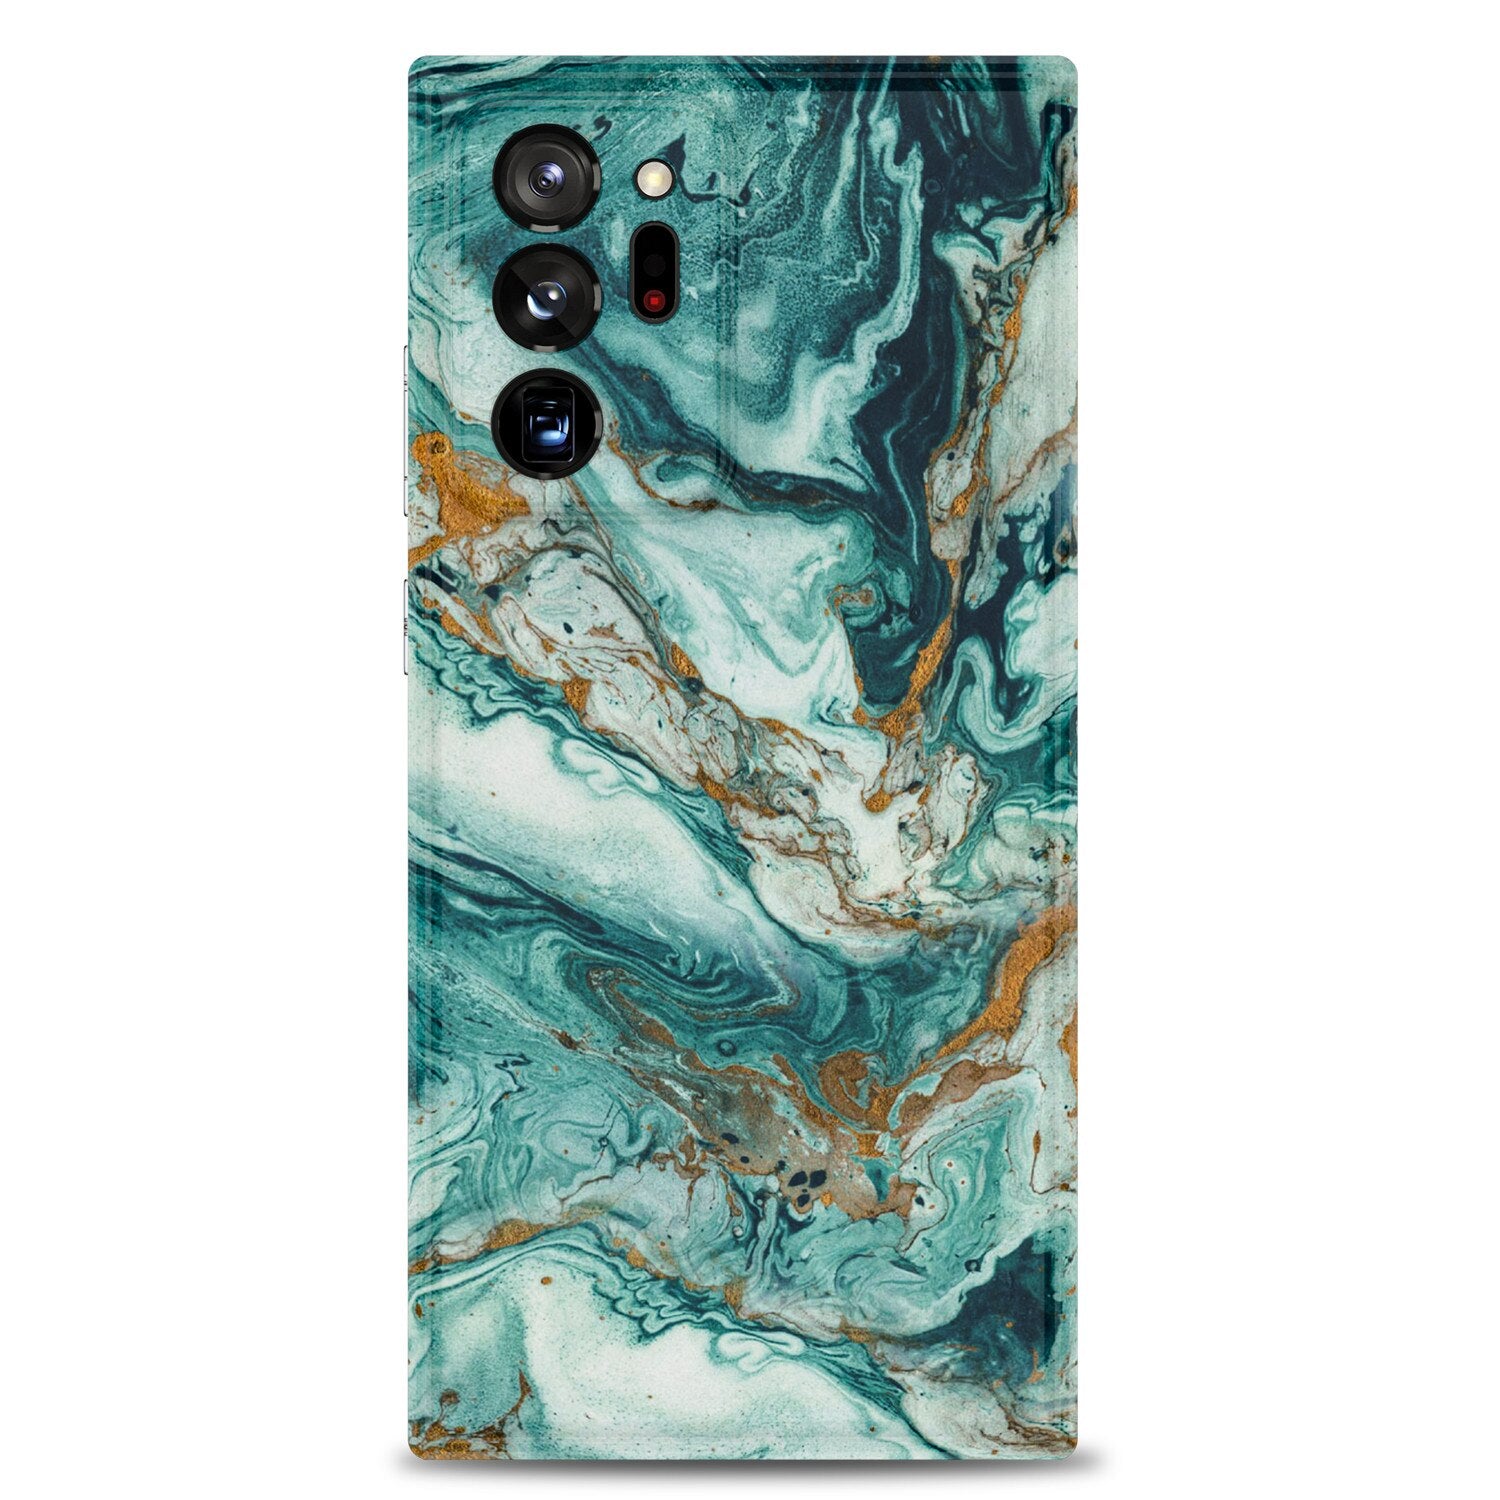 Case for Samsung Galaxy Note 20 Ultra Marble Case,Slim Thin Glossy Soft TPU Rubber Gel Phone Case Cover for Samsung Note 20Ultra - 380230 for Note 20 / green / United States Find Epic Store